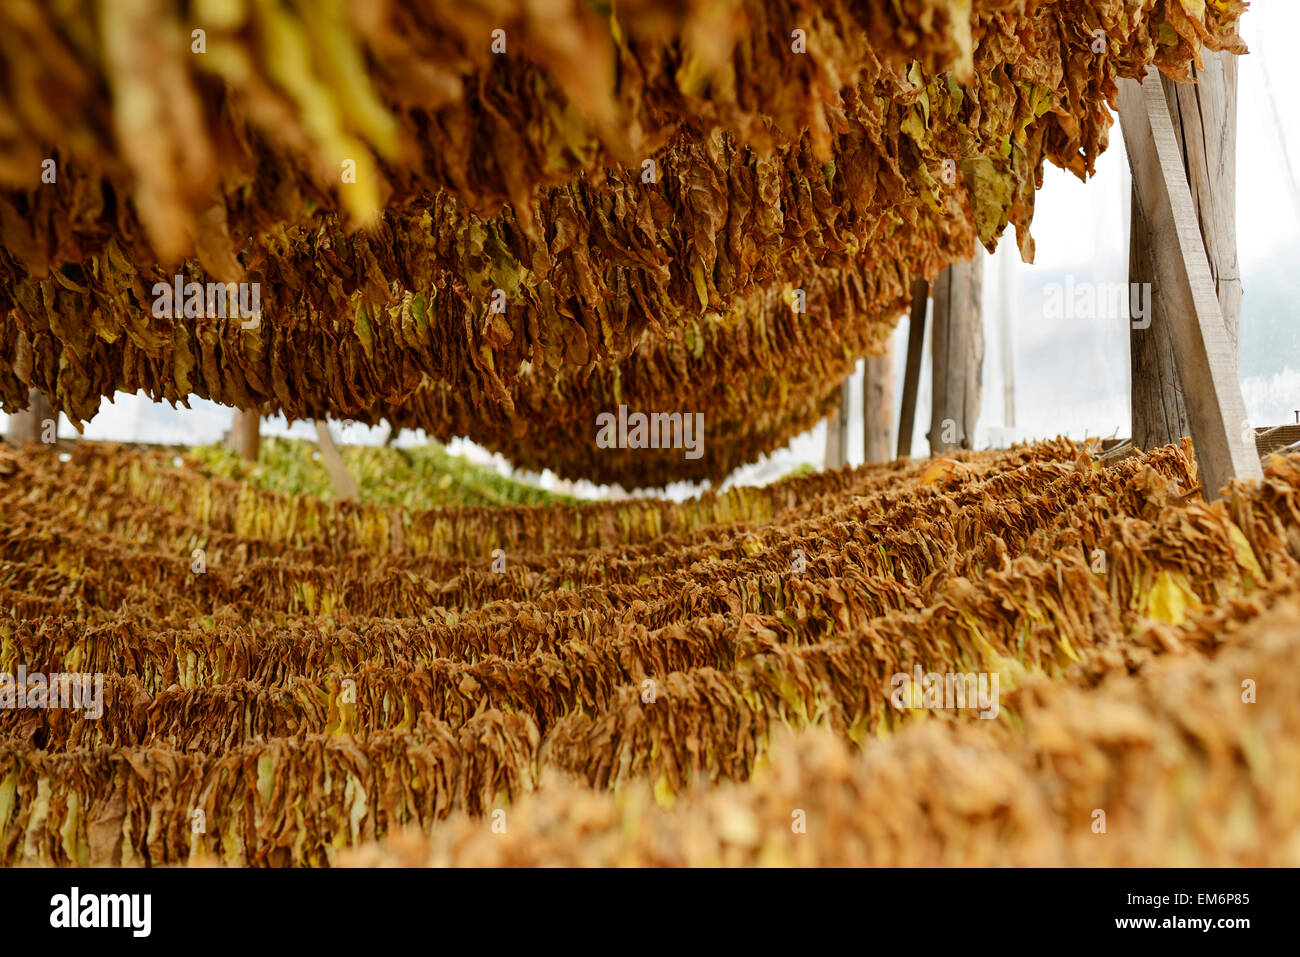 Hanging drying tobacco leaves in Macedonia. Stock Photo